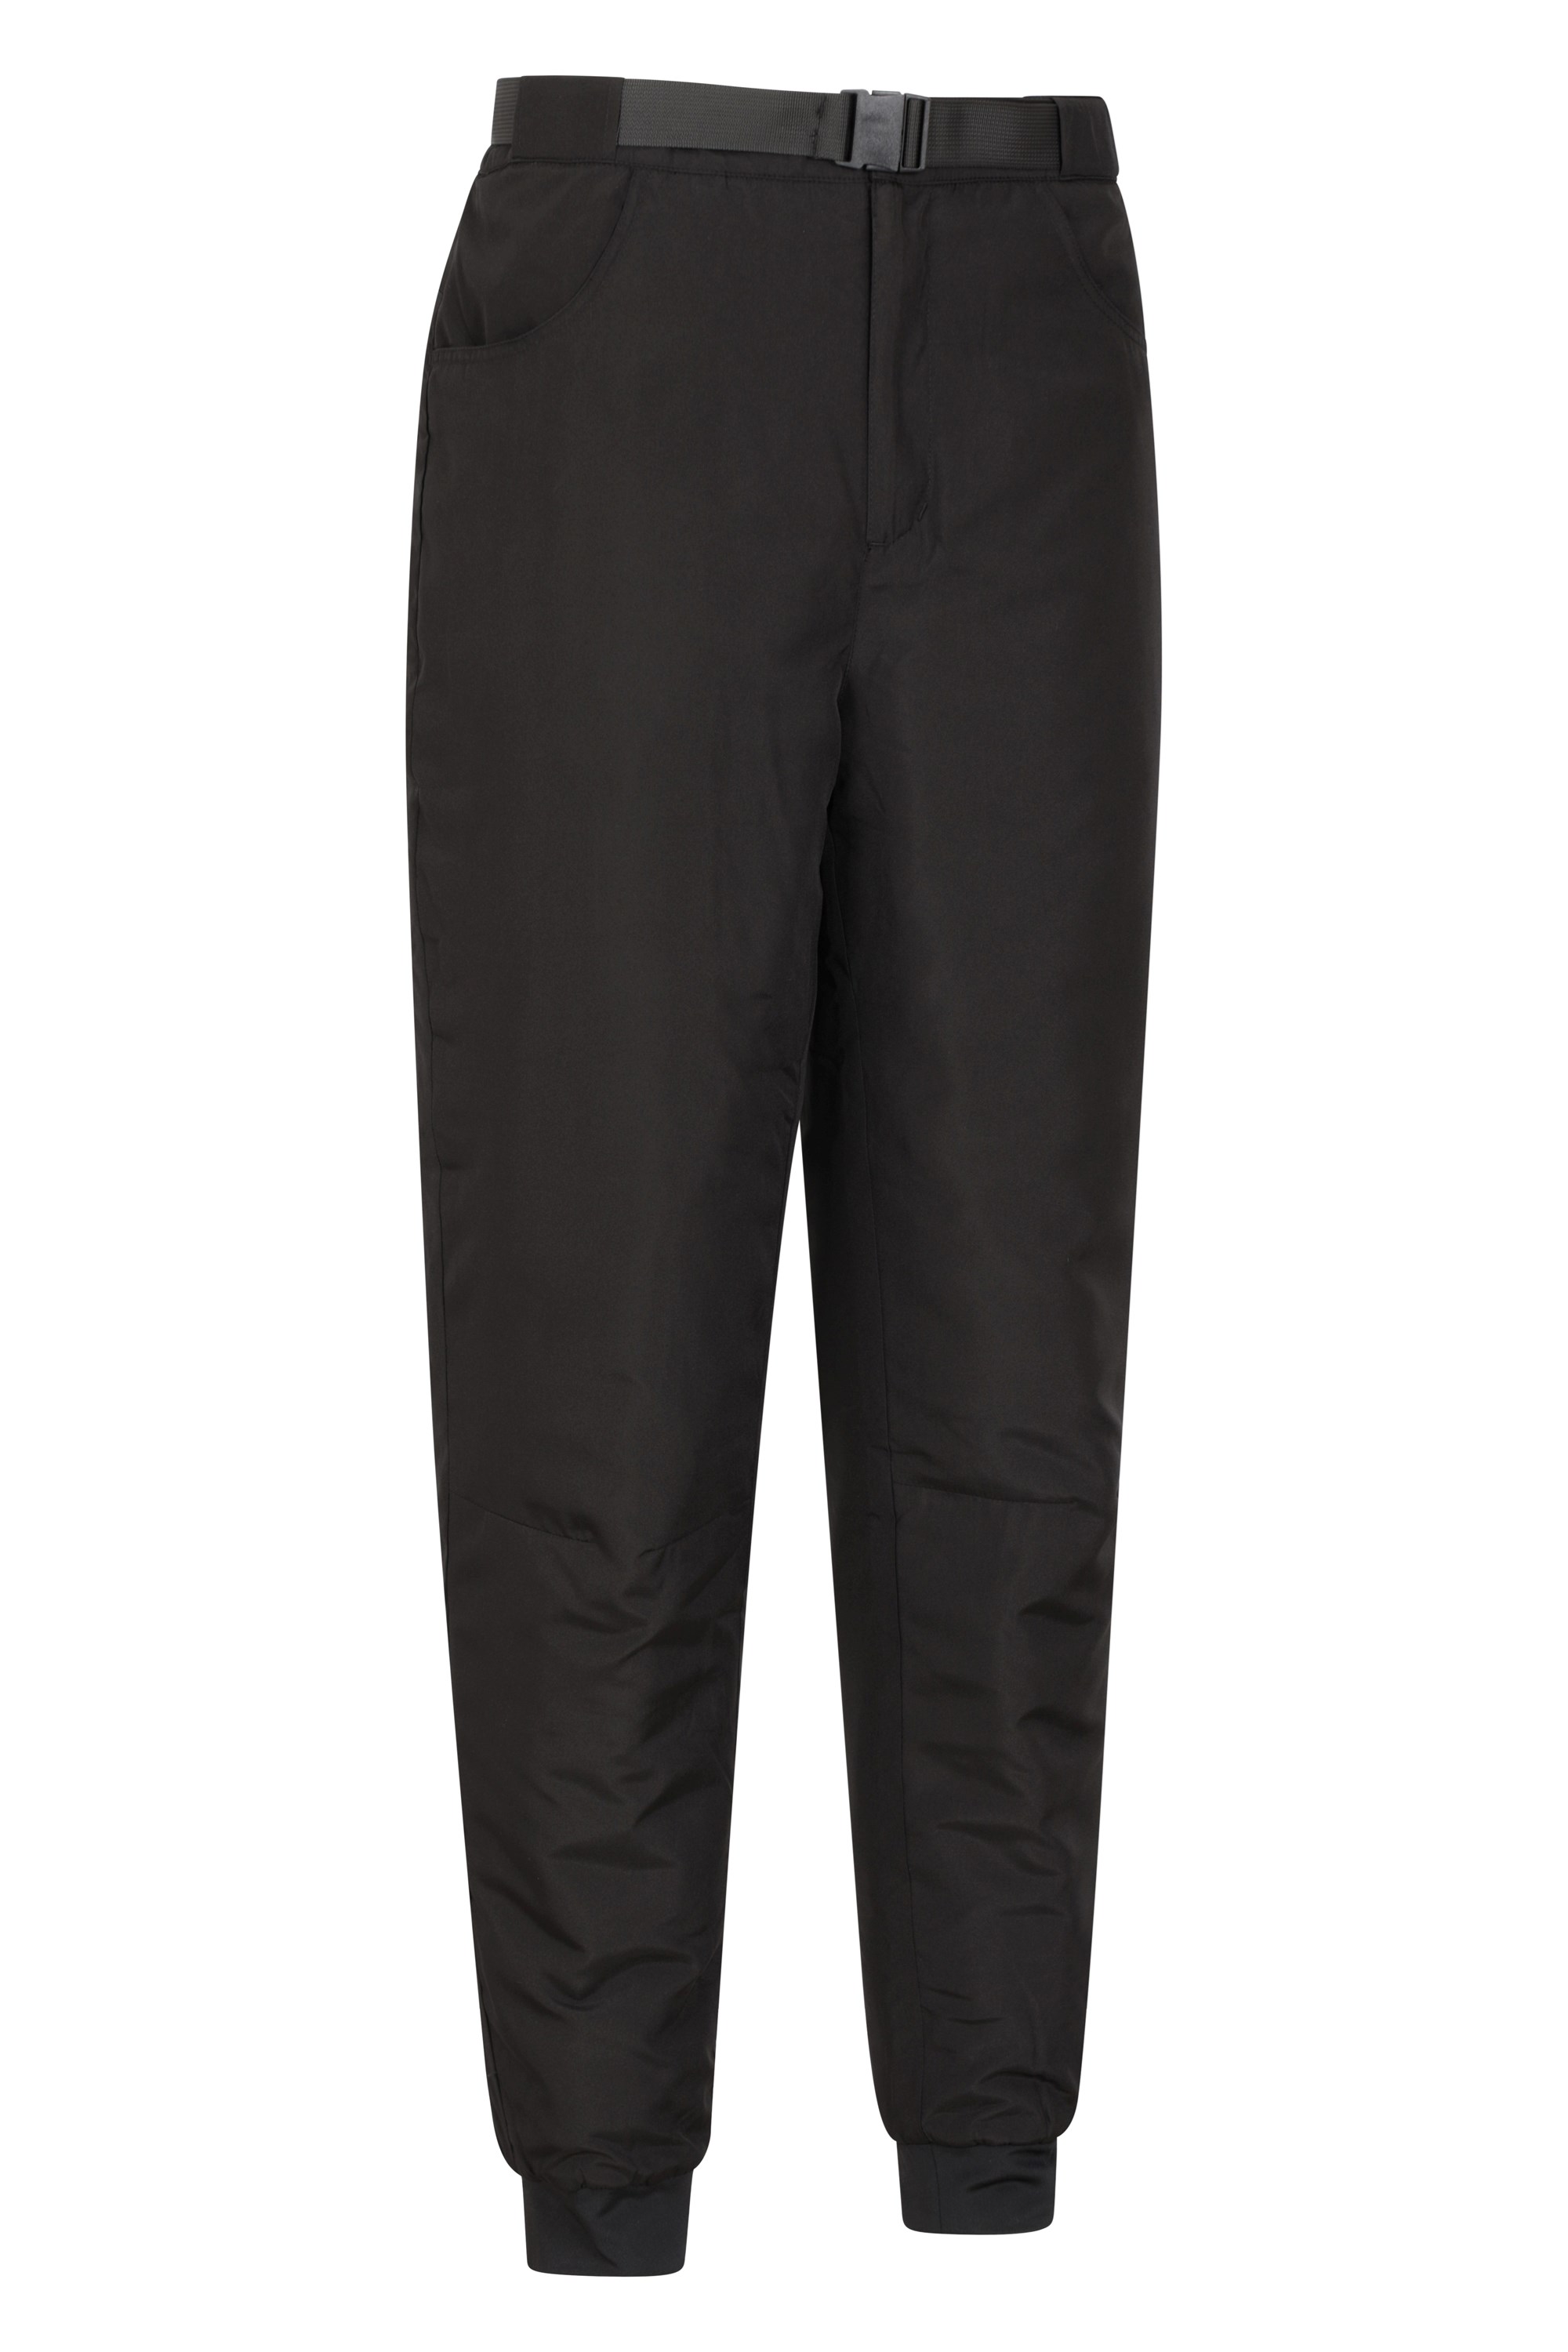 Driven Hunt HWS Insulated trousers | Härkila